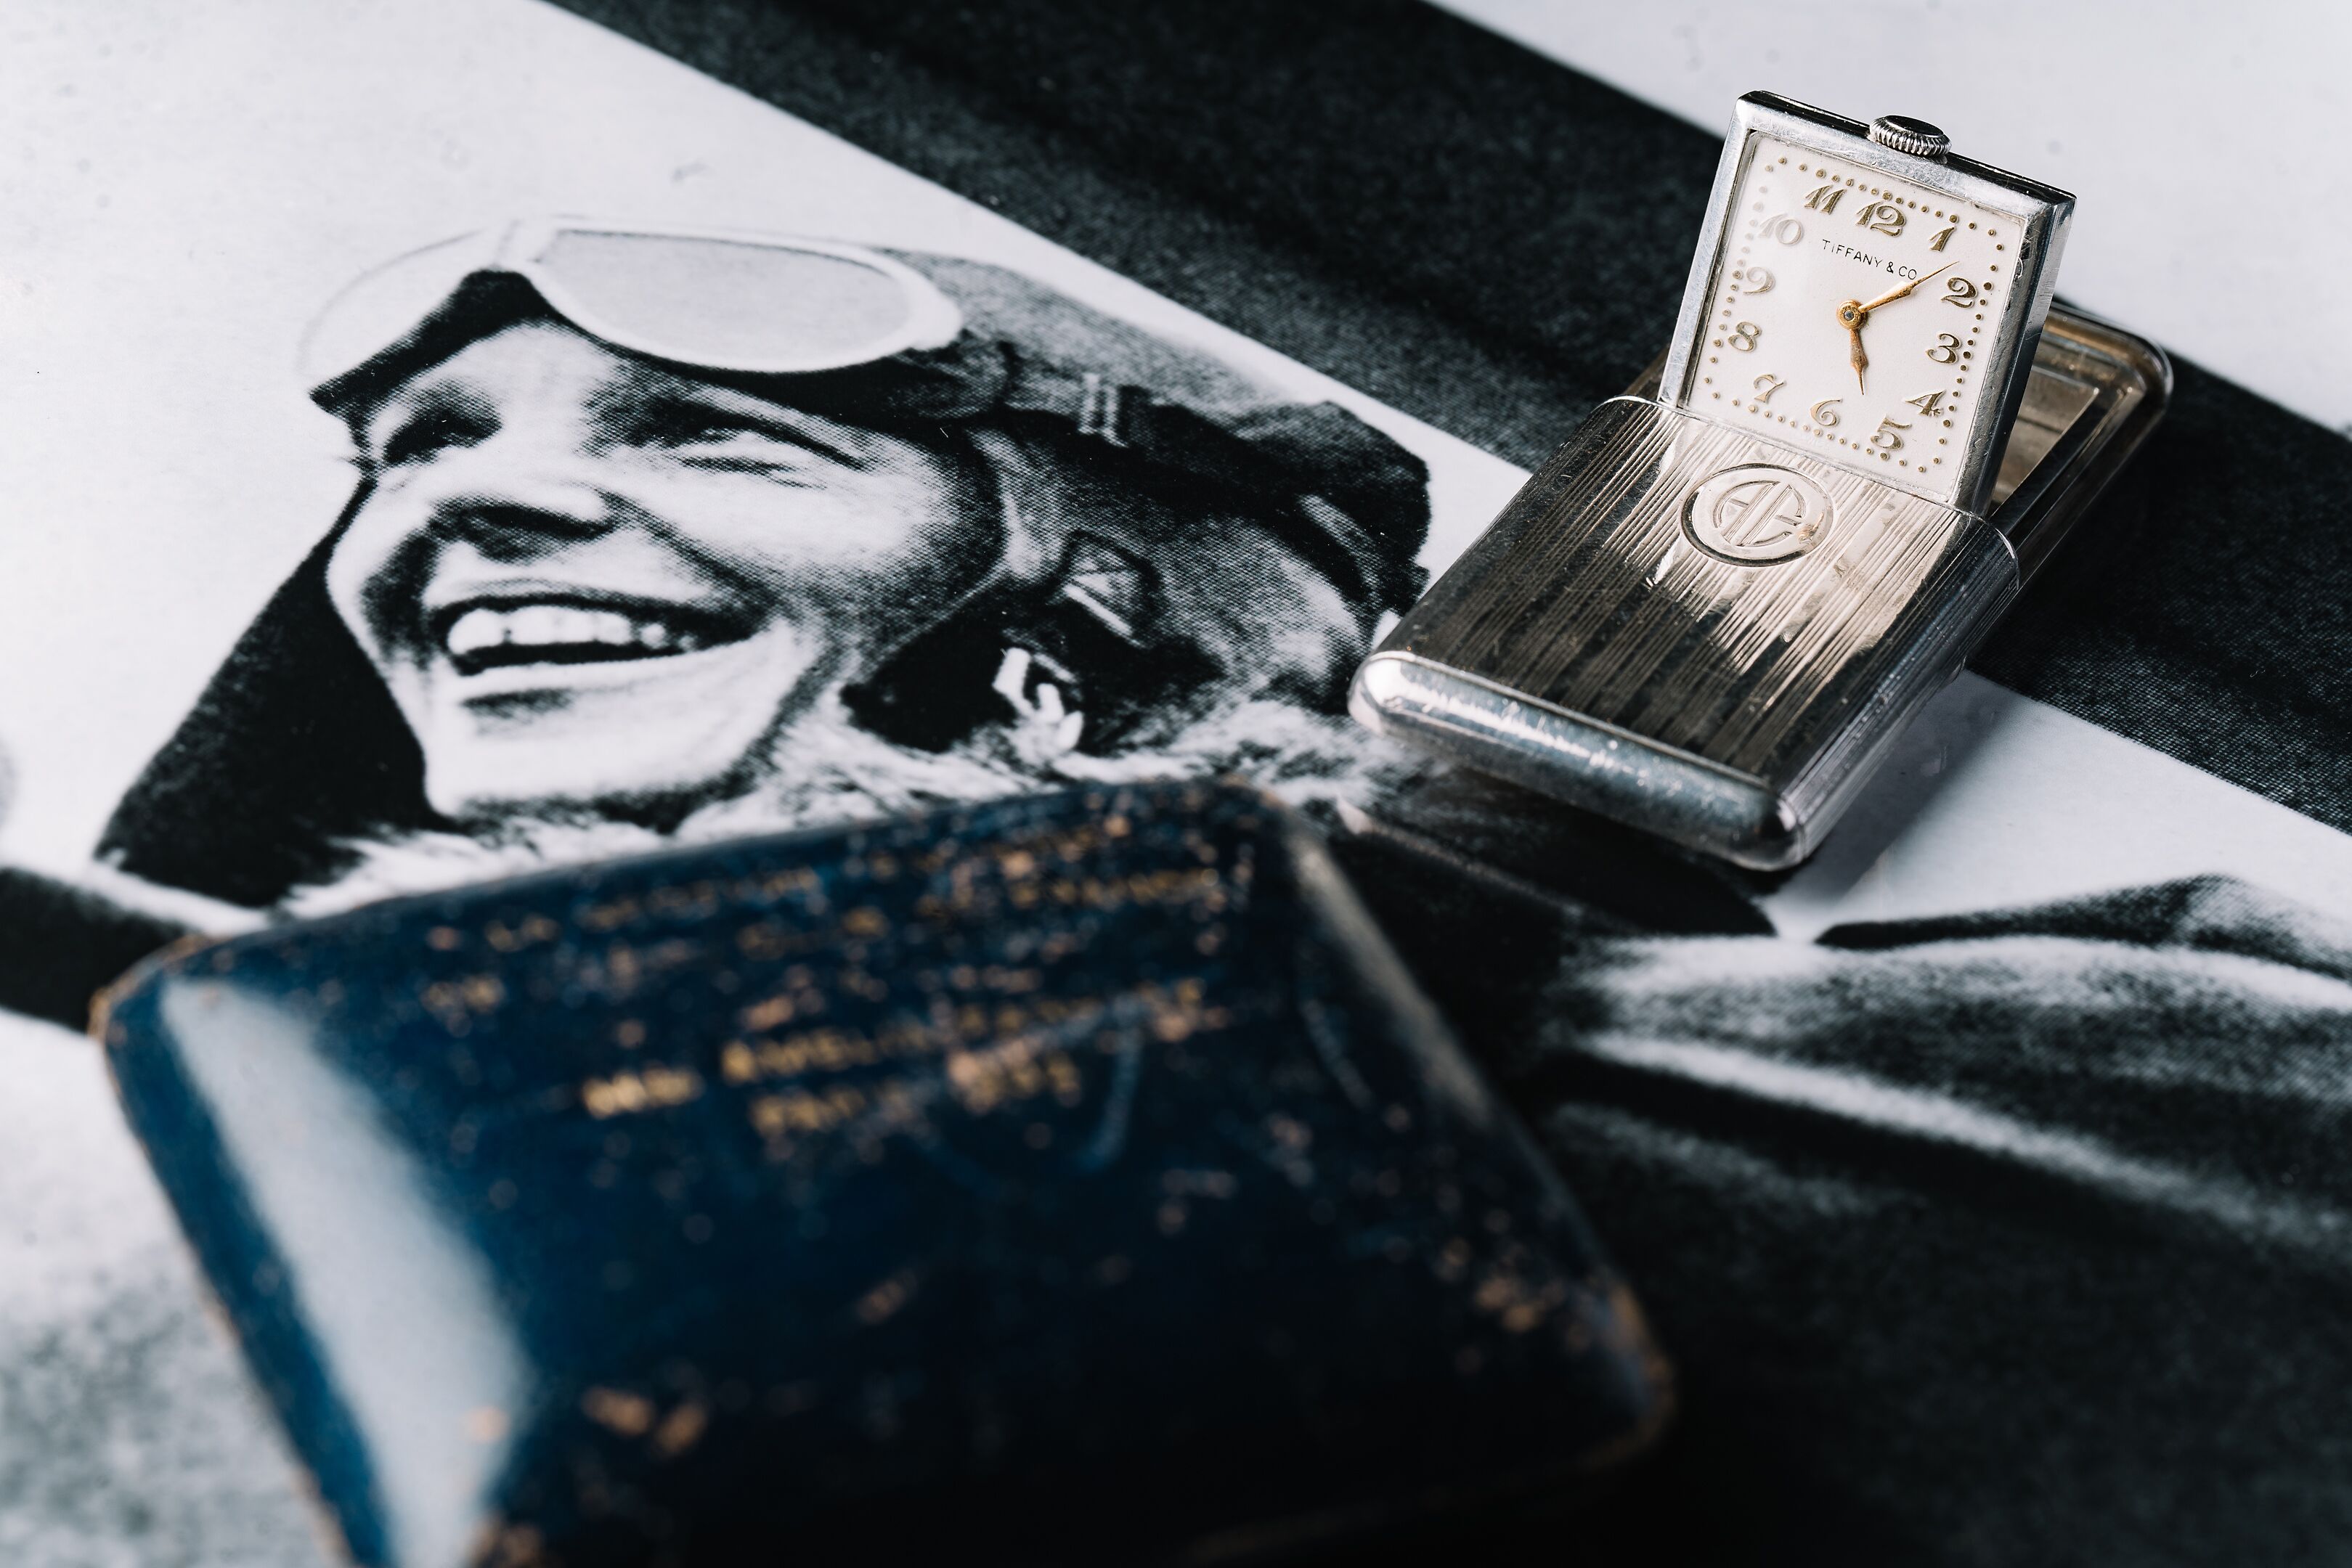 Amelia Earhart’s Tiffany & Co Travel Watch And The Tragic Tale Of Two Aviation Pioneers